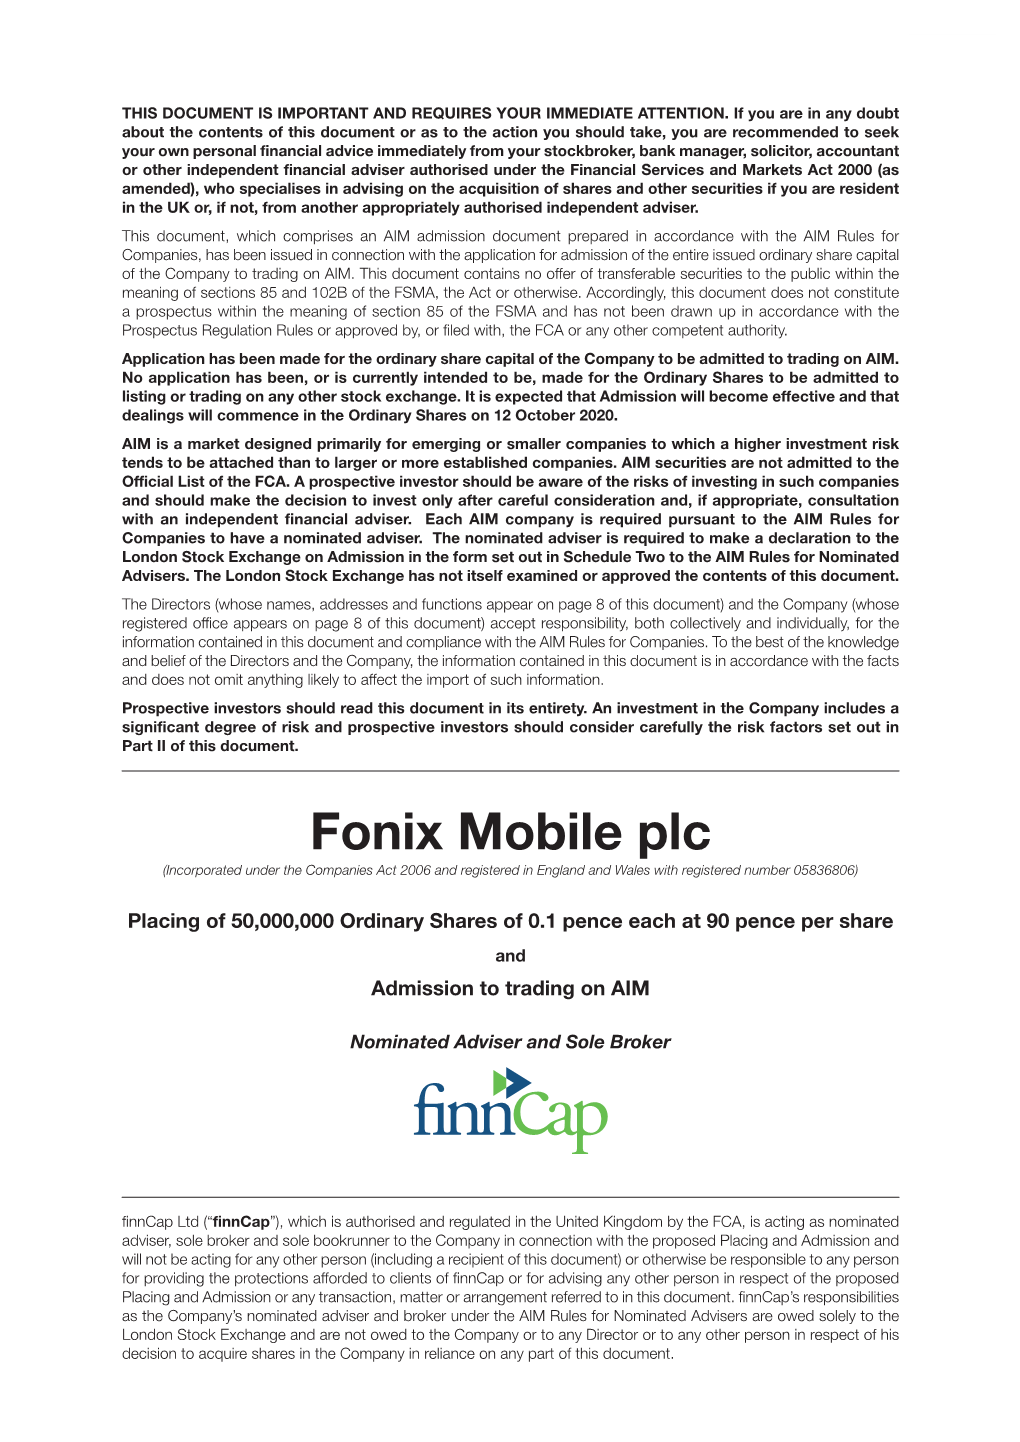 Fonix Mobile Plc (Incorporated Under the Companies Act 2006 and Registered in England and Wales with Registered Number 05836806)